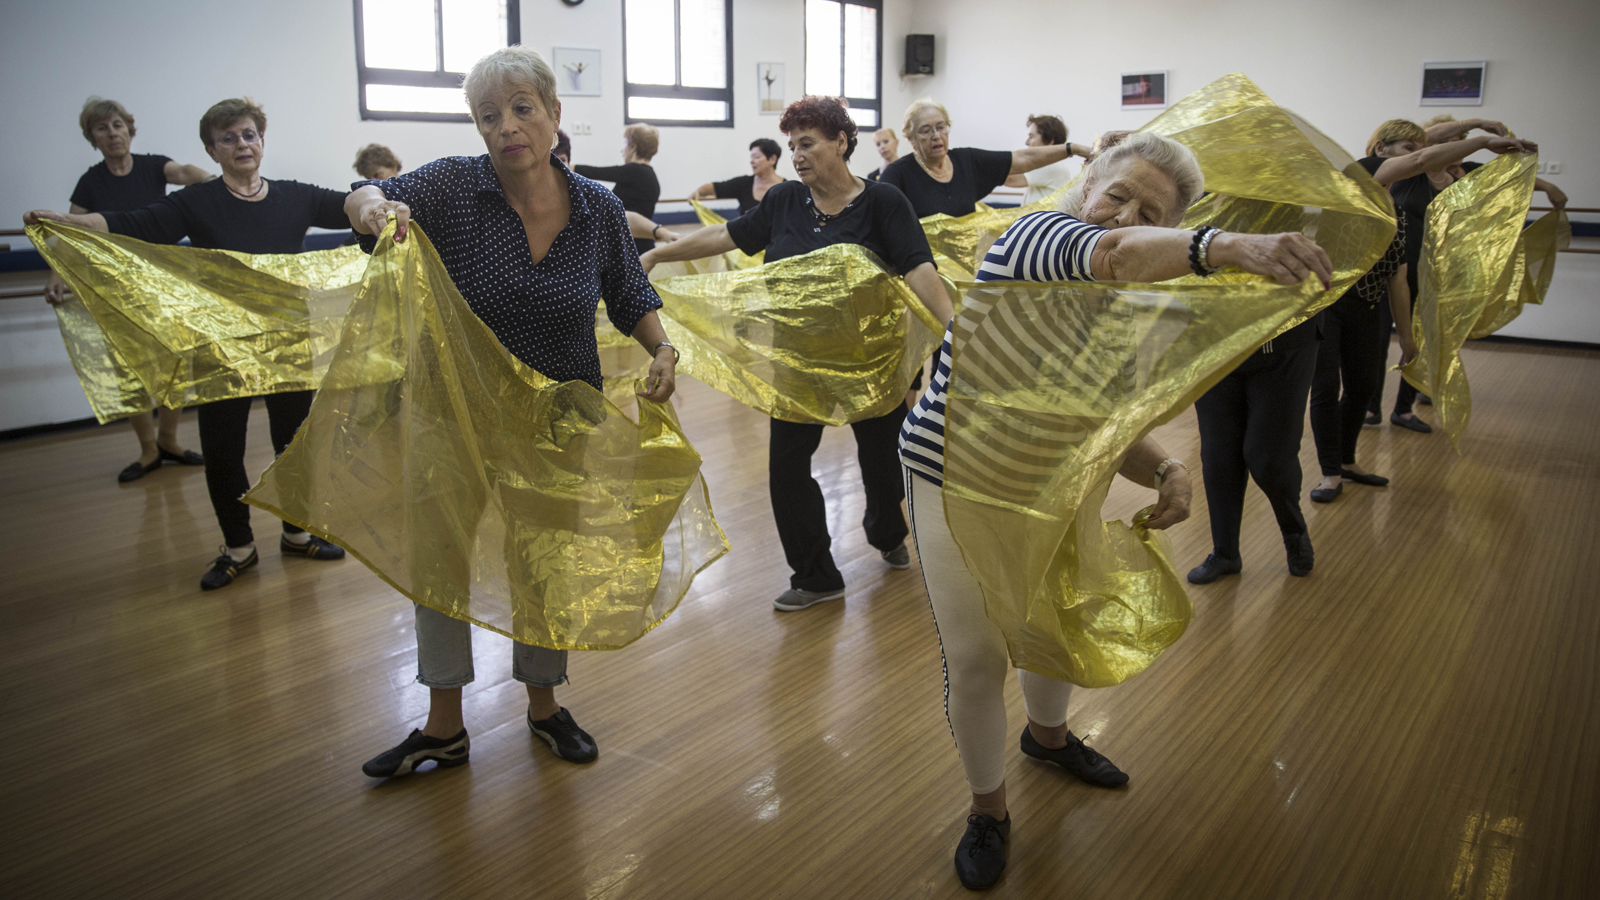 A dance class for 60-90-year-old women  at a community center in Jerusalem. Photo by Hadas Parush/Flash90